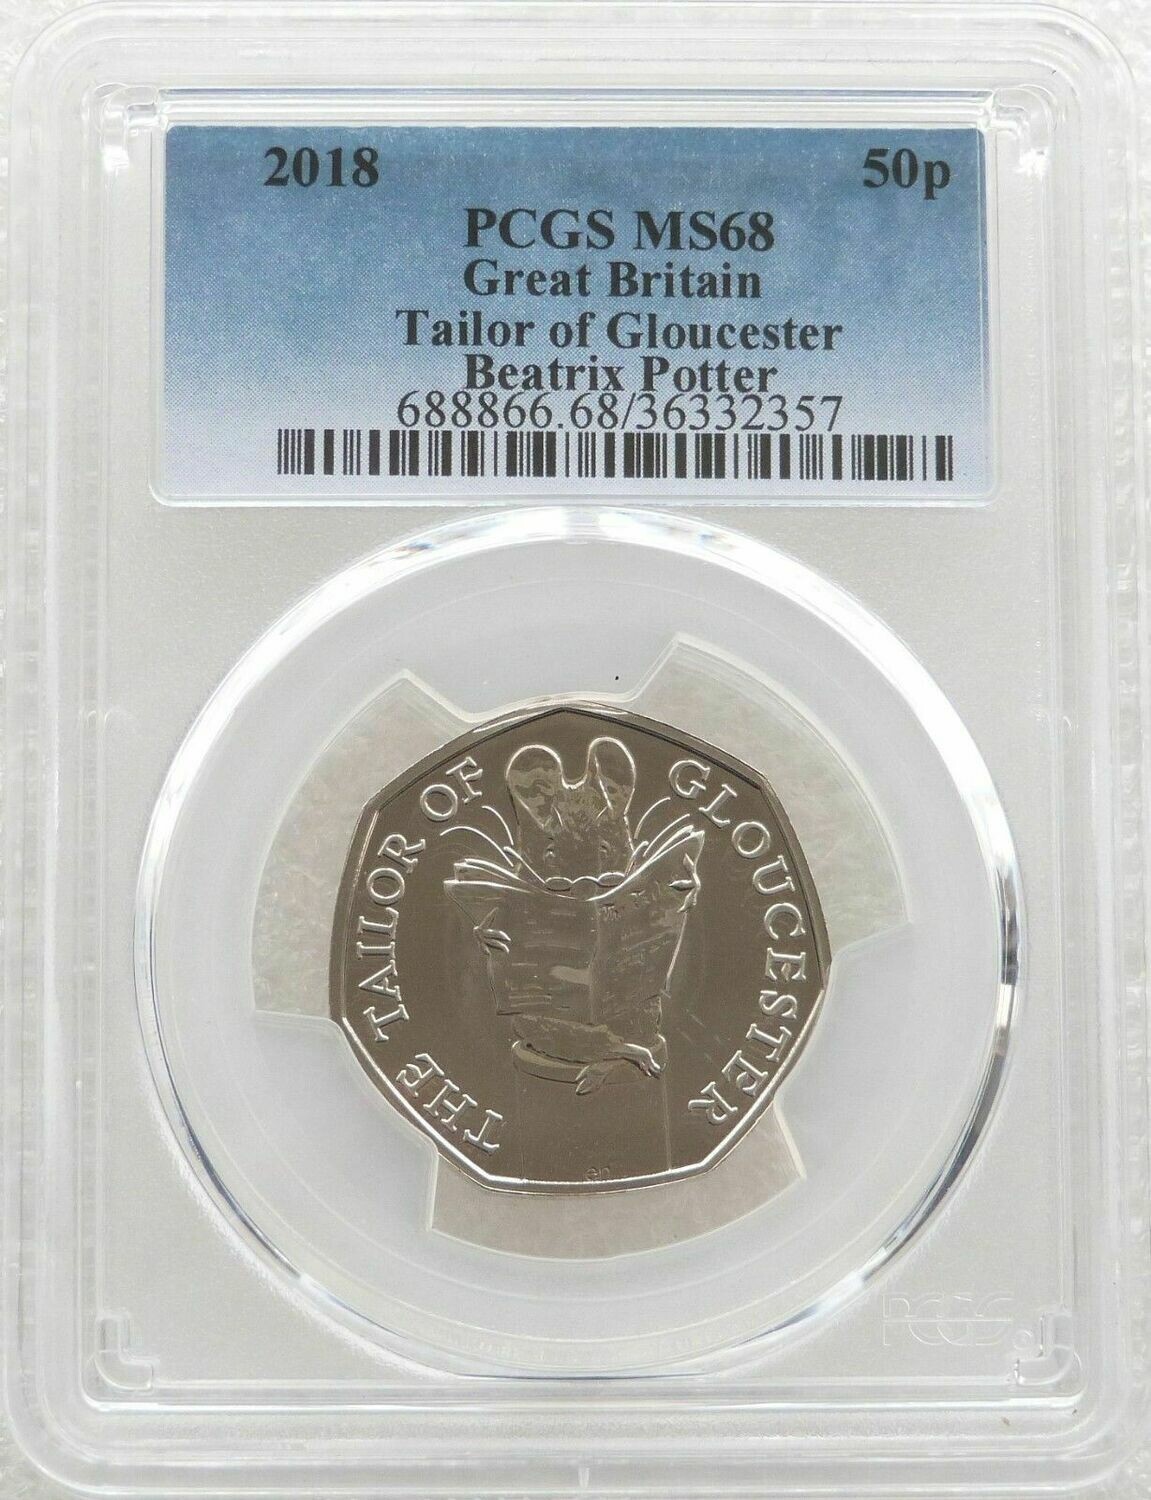 2018 Tailor of Gloucester 50p Brilliant Uncirculated Coin PCGS MS68